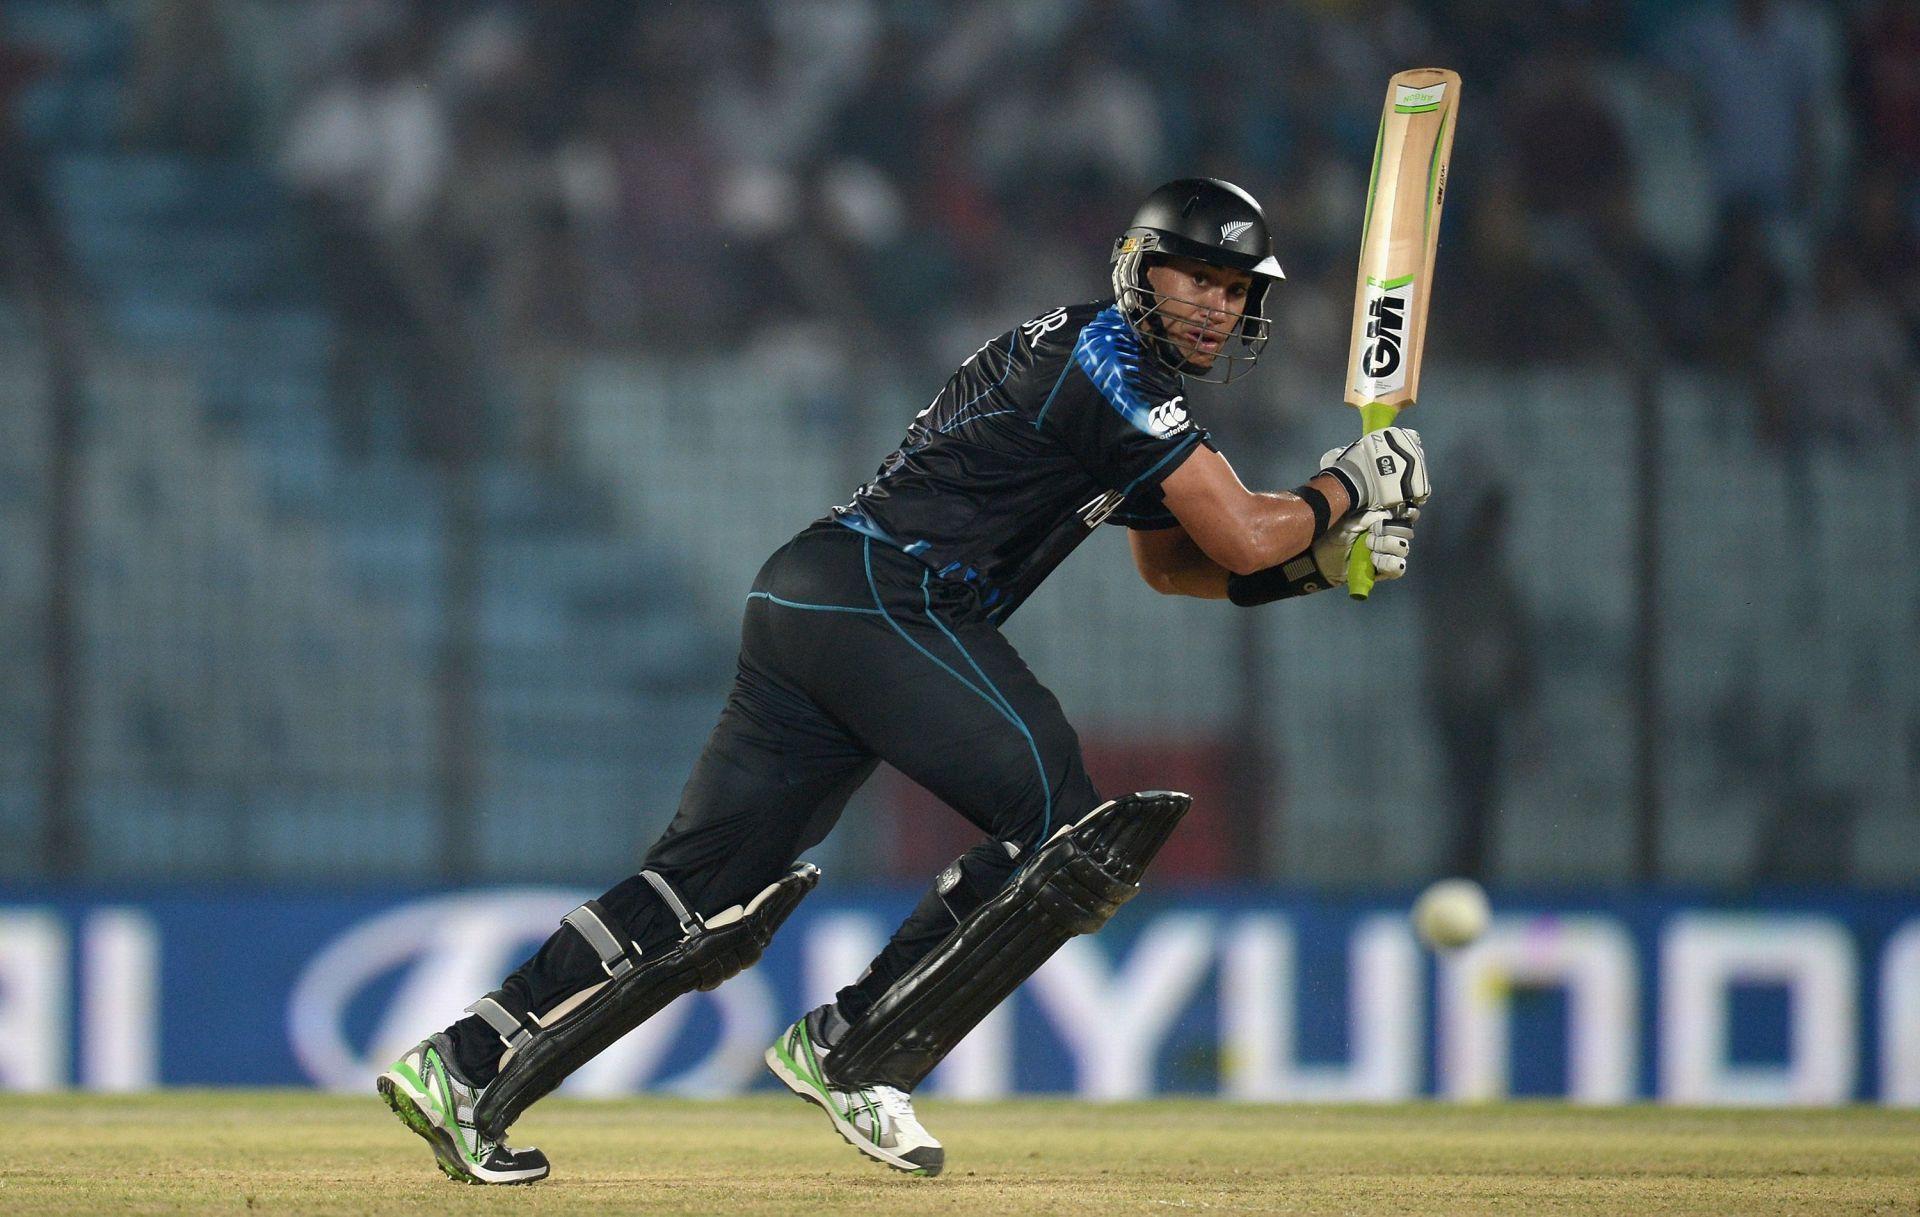 Ross Taylor&#039;s blistering 62 ended in vain against South Africa at the T20 World Cup in 2014.